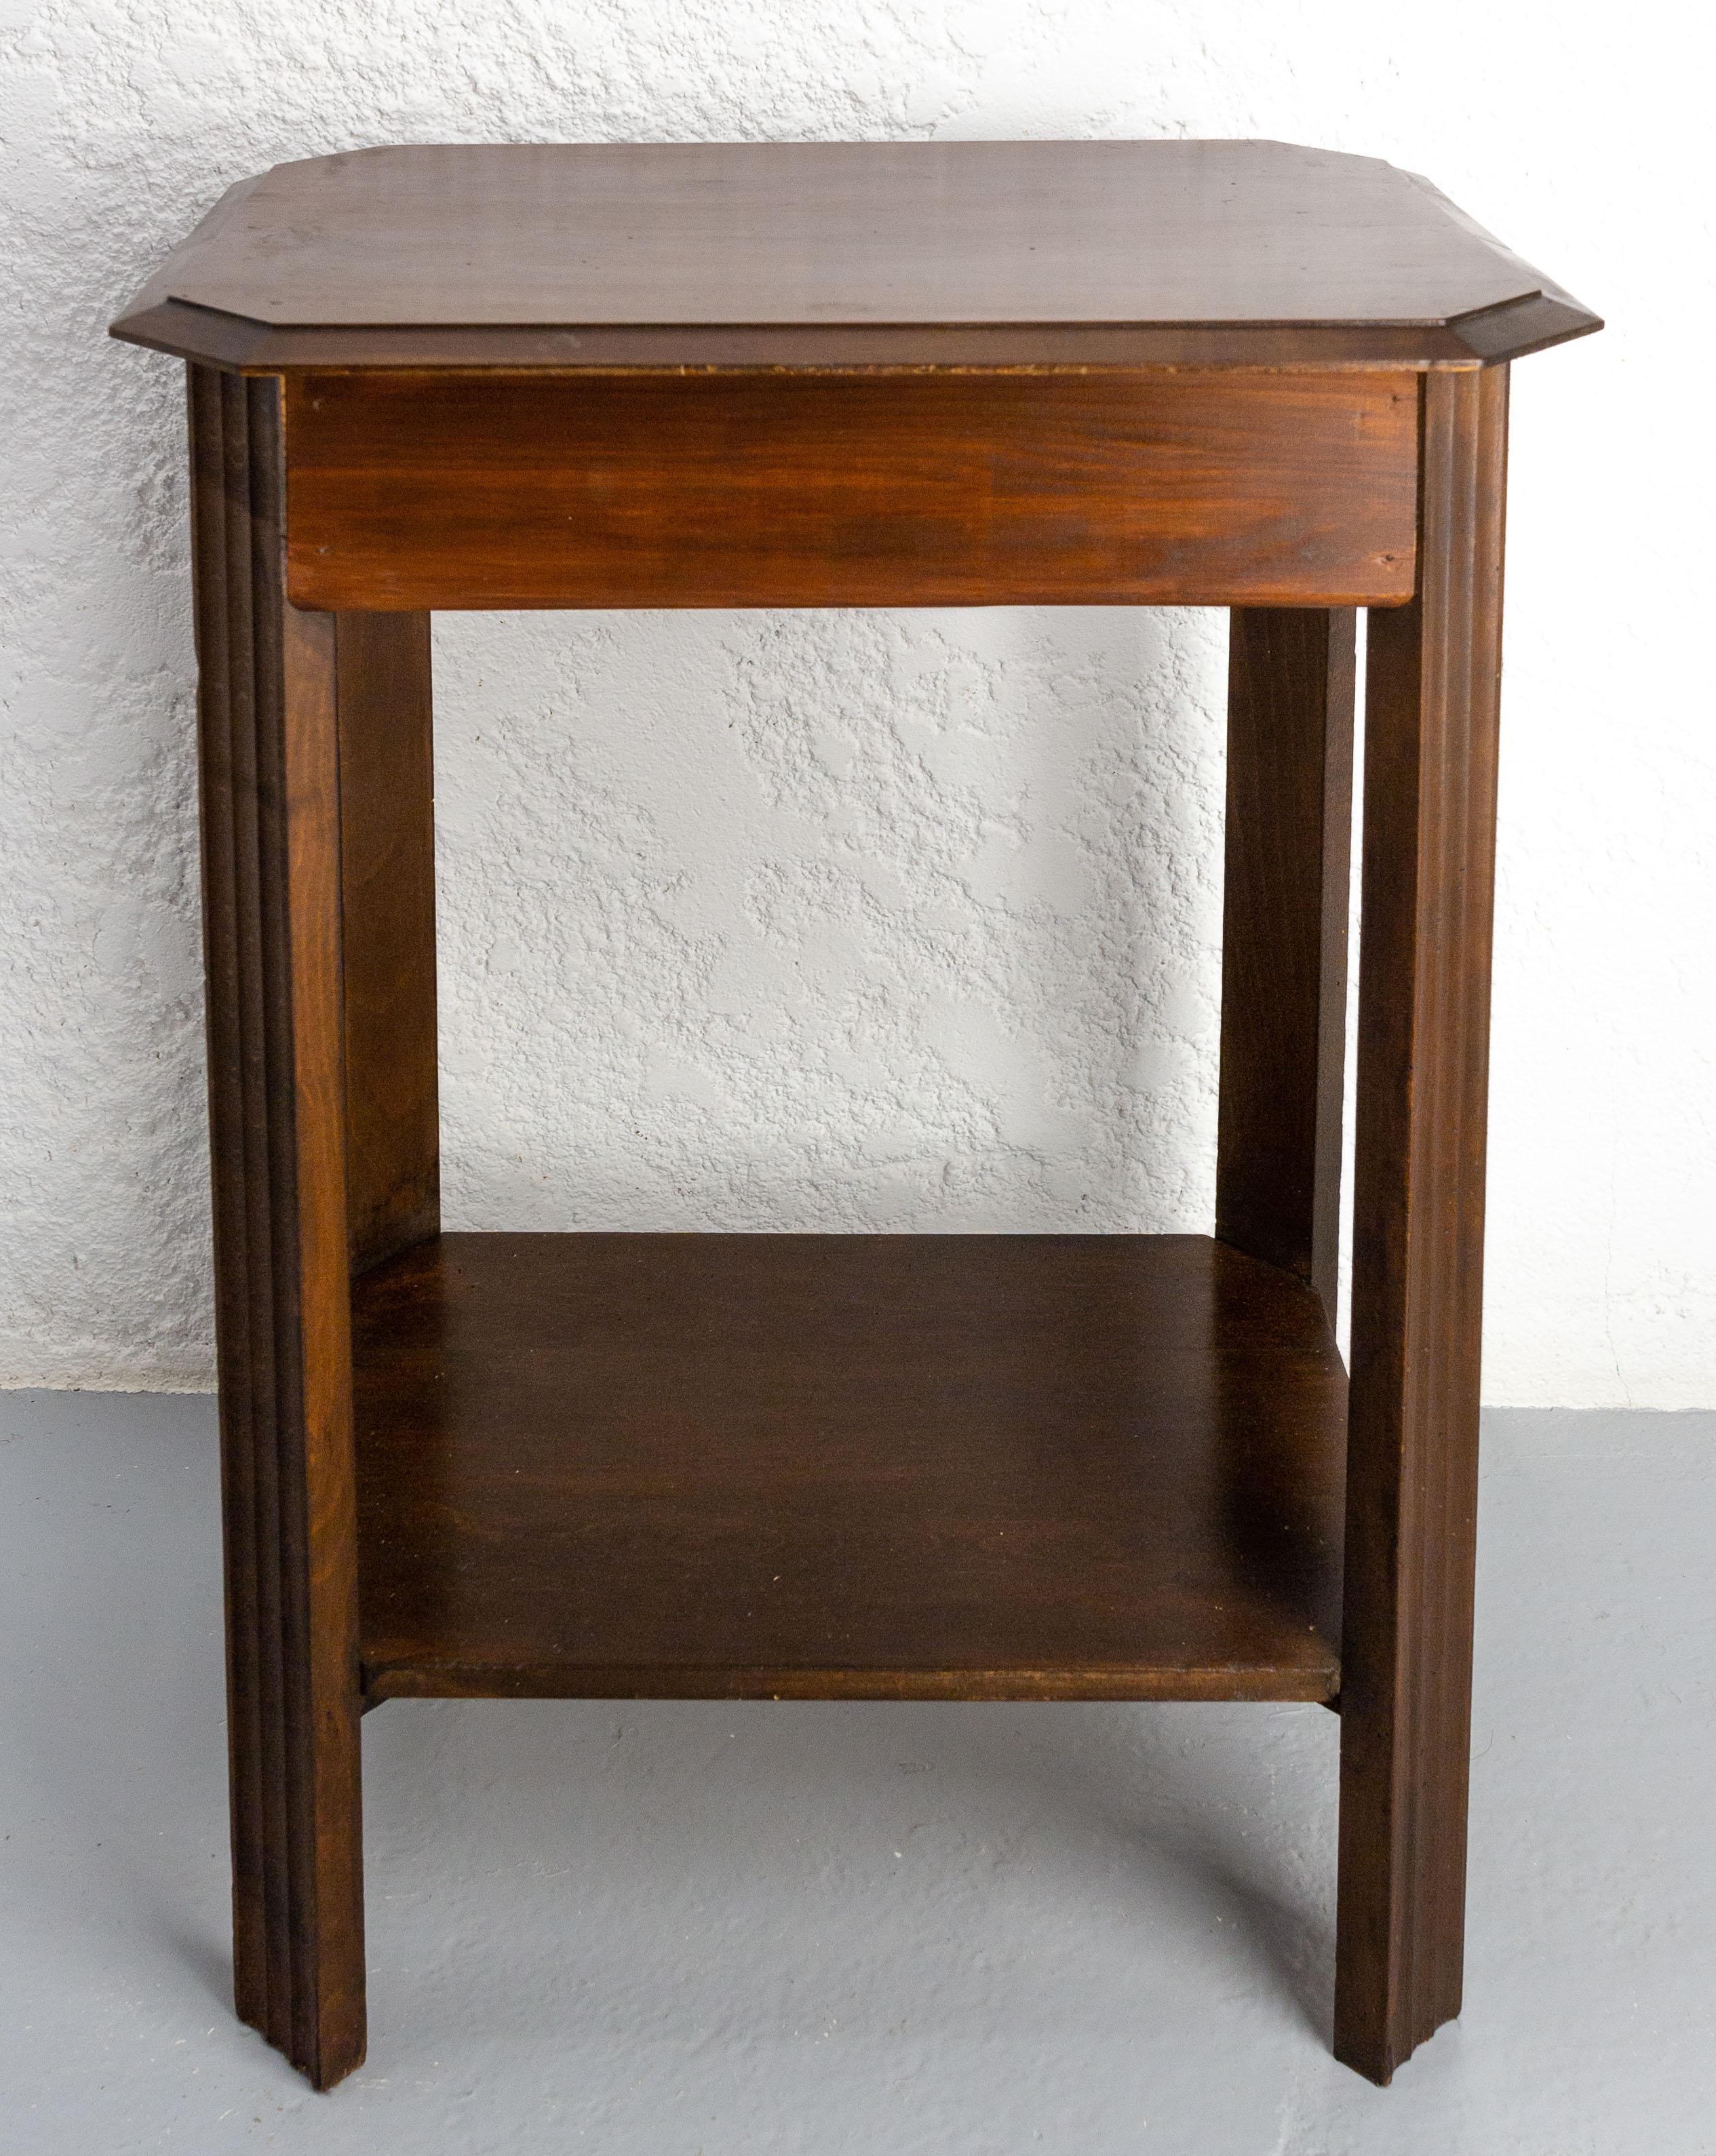 French Poplar Side Table Sellette or Nightstand Art Deco, circa 1930 For Sale 4